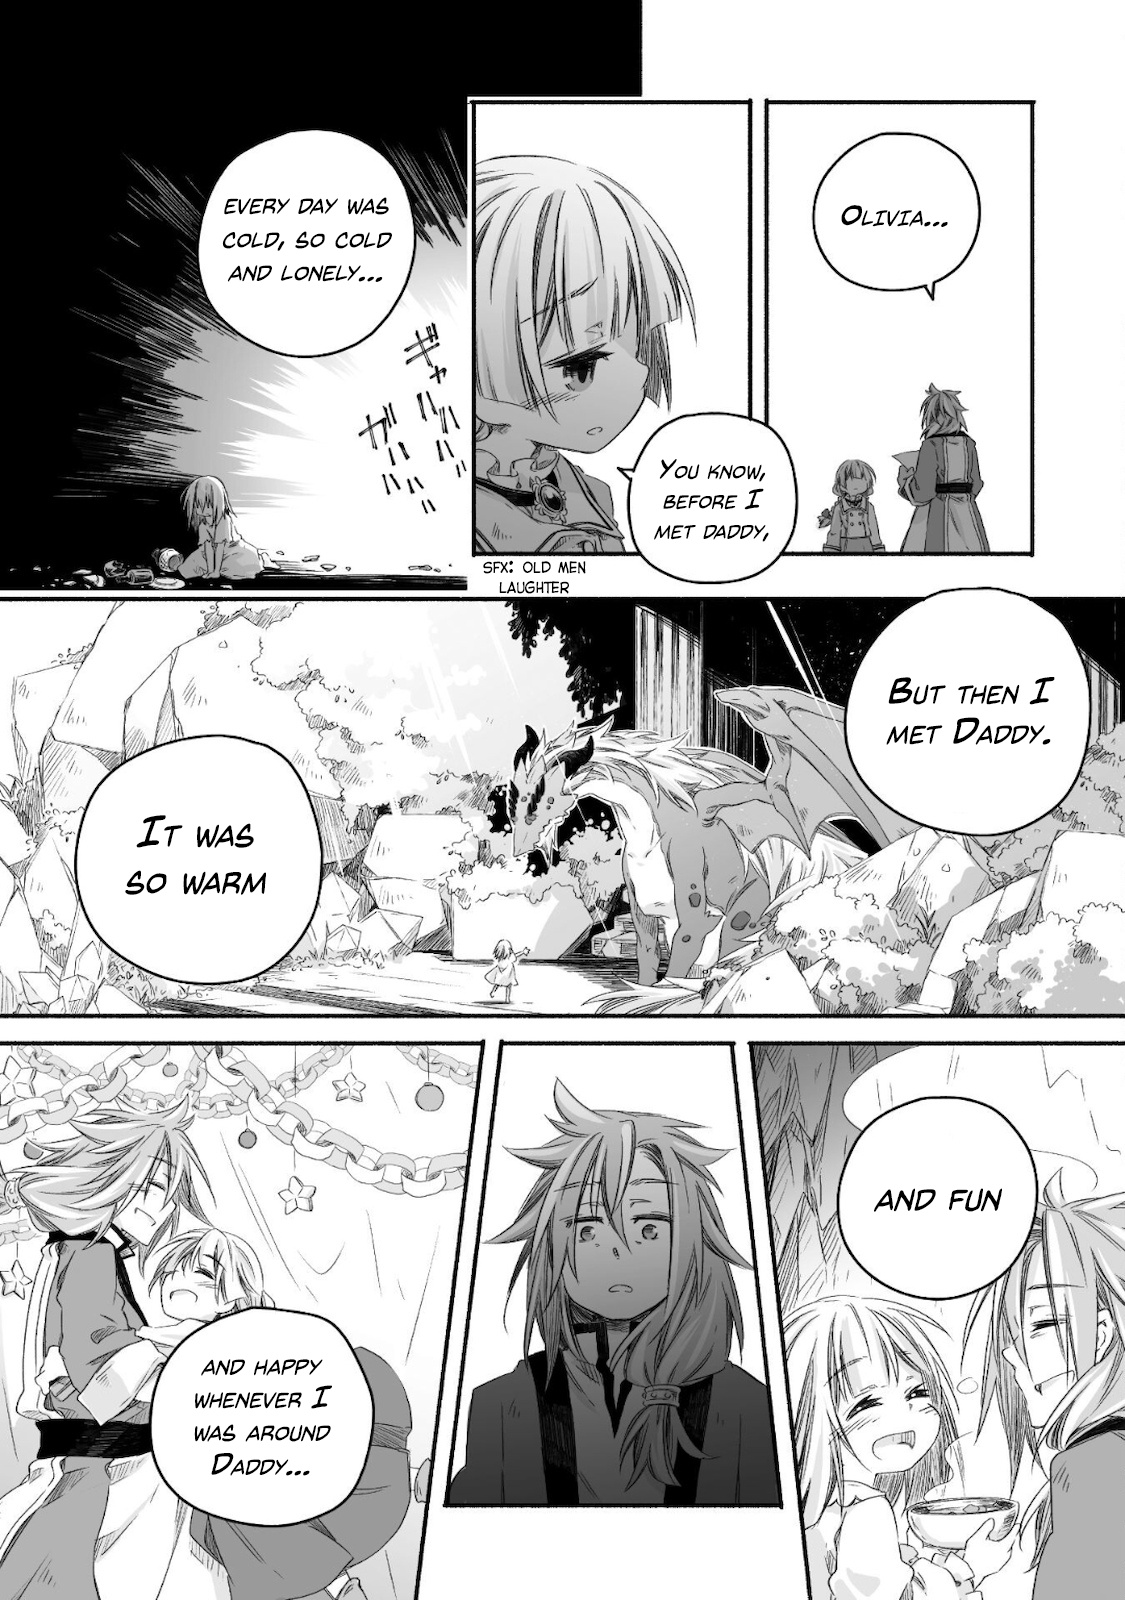 Parenting Diary Of The Strongest Dragon Who Suddenly Became A Dad ～ Cute Daughter, Heartwarming And Growing Up To Be The Strongest In The Human World ～ - 11 page 17-923e184a